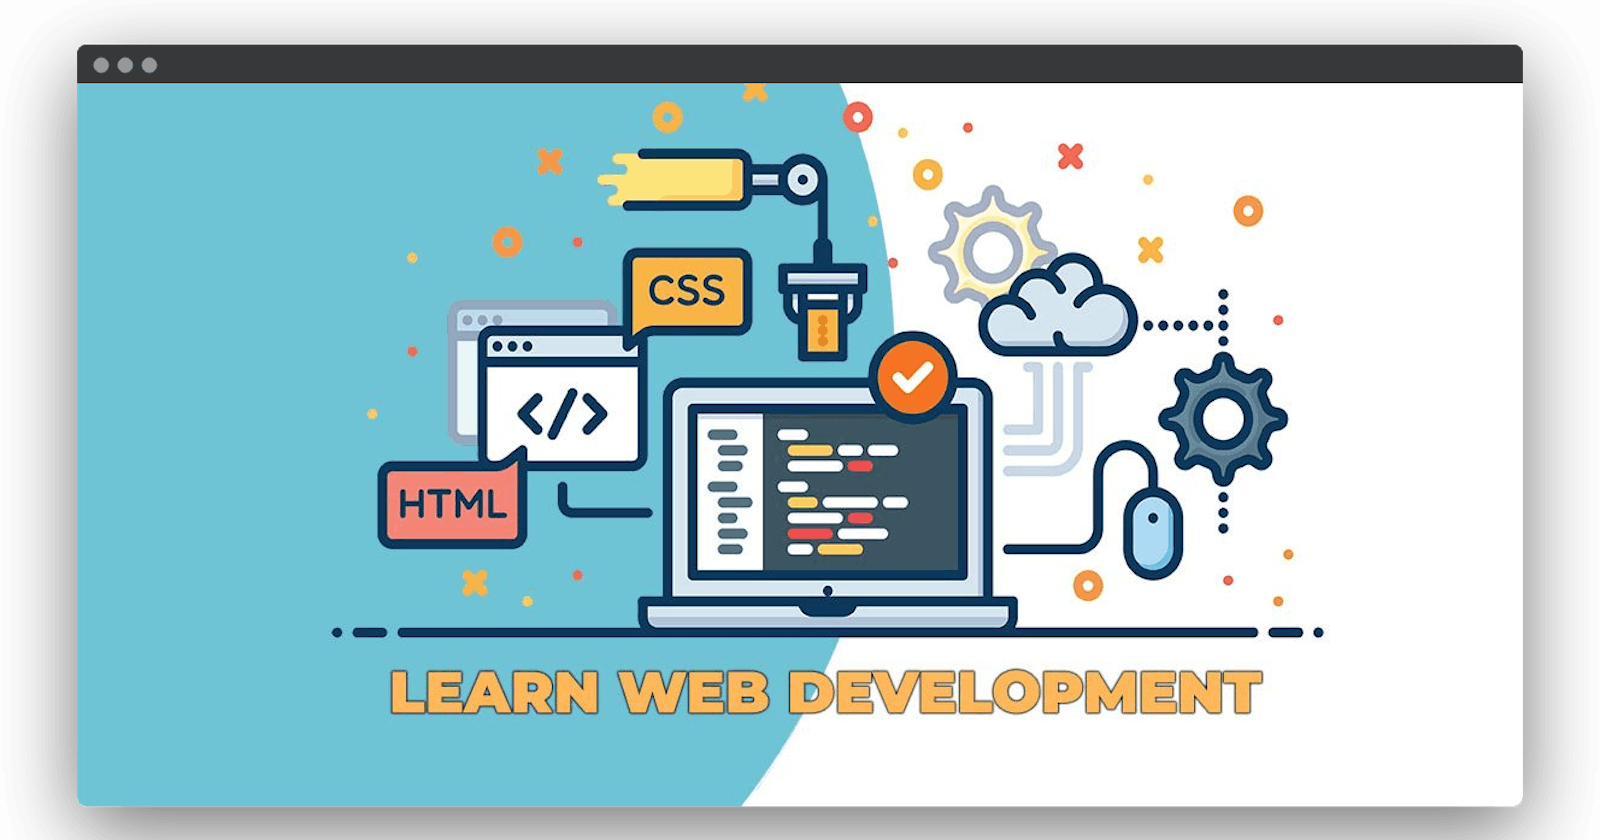 How to Learn Web Development Effectively